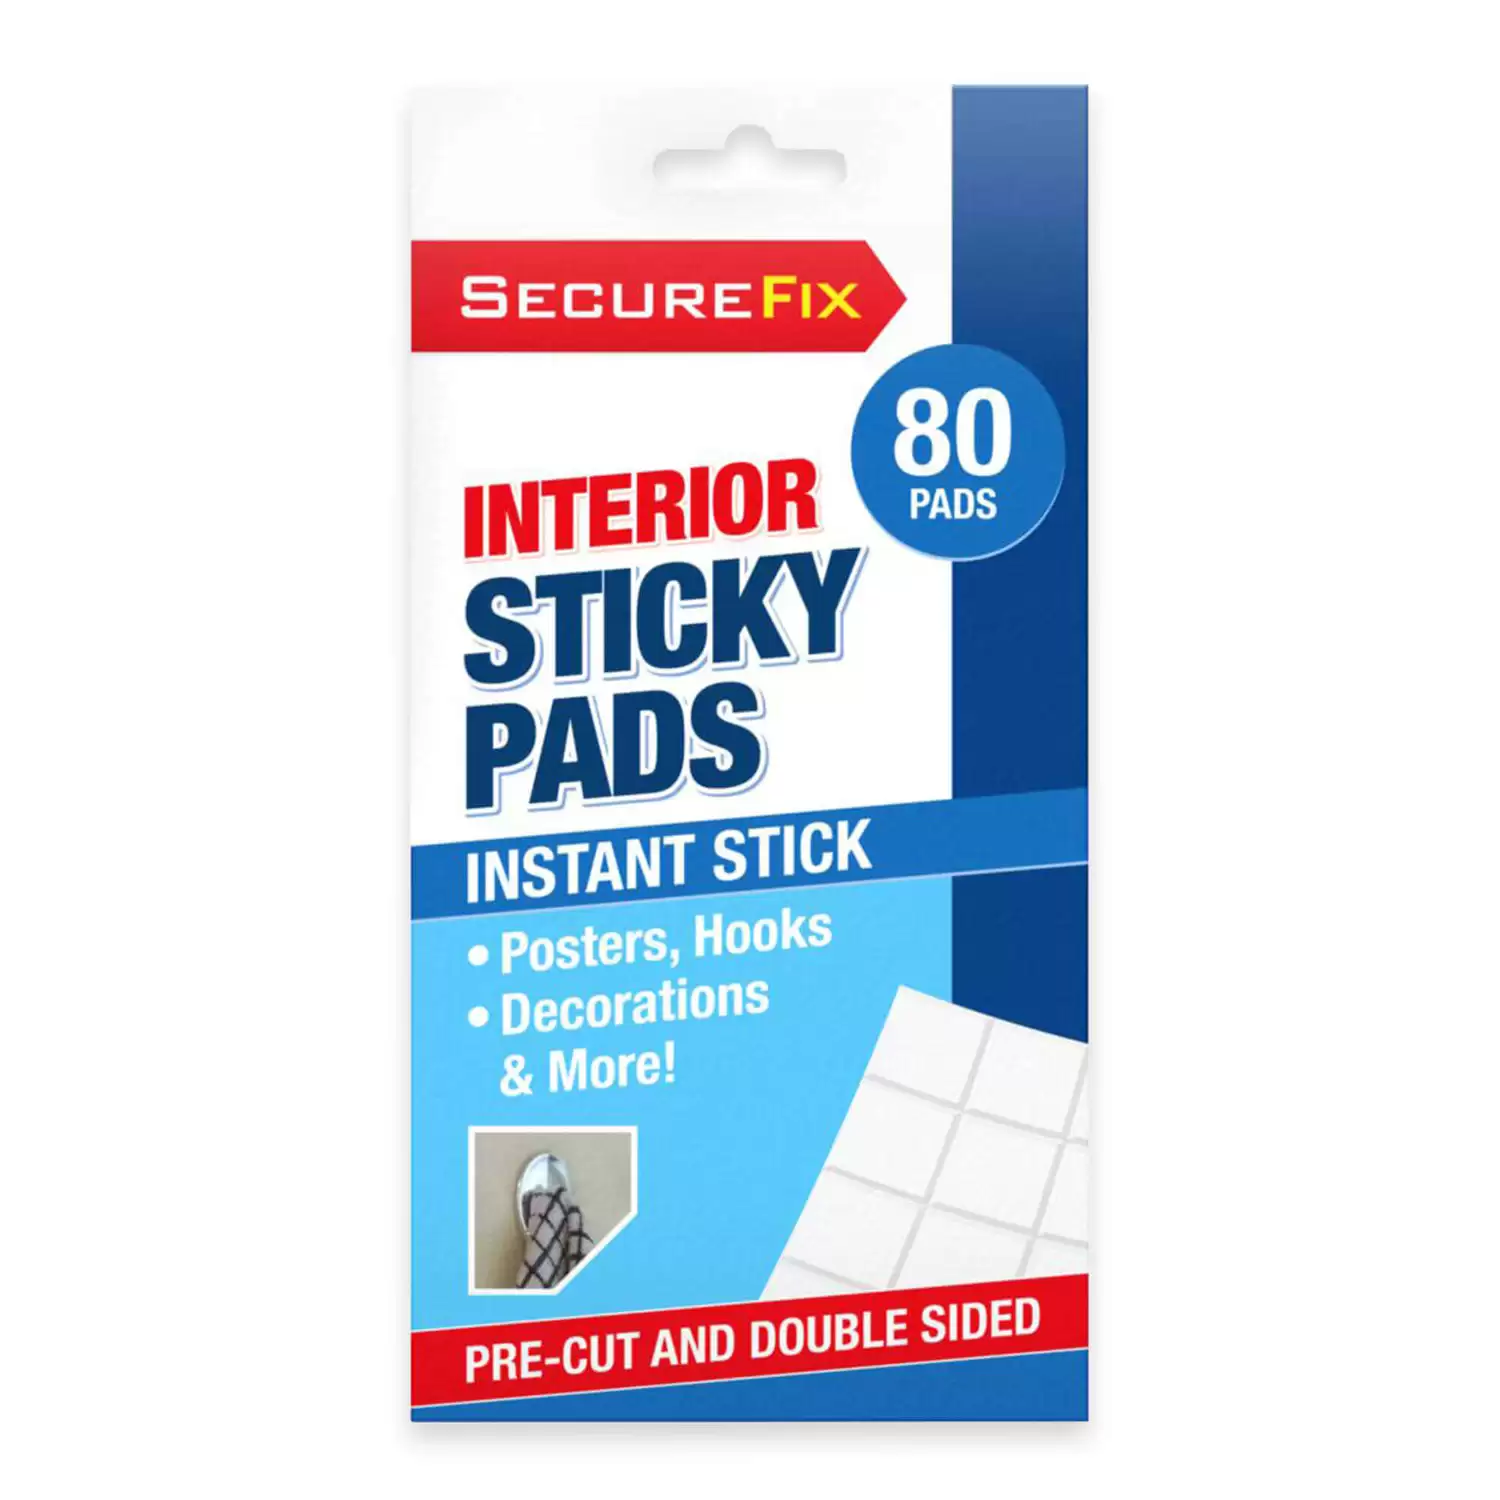 https://www.gompels.co.uk/image/cache/data/46080-interior-sticky-pads-80-pack-1500x1500.webp